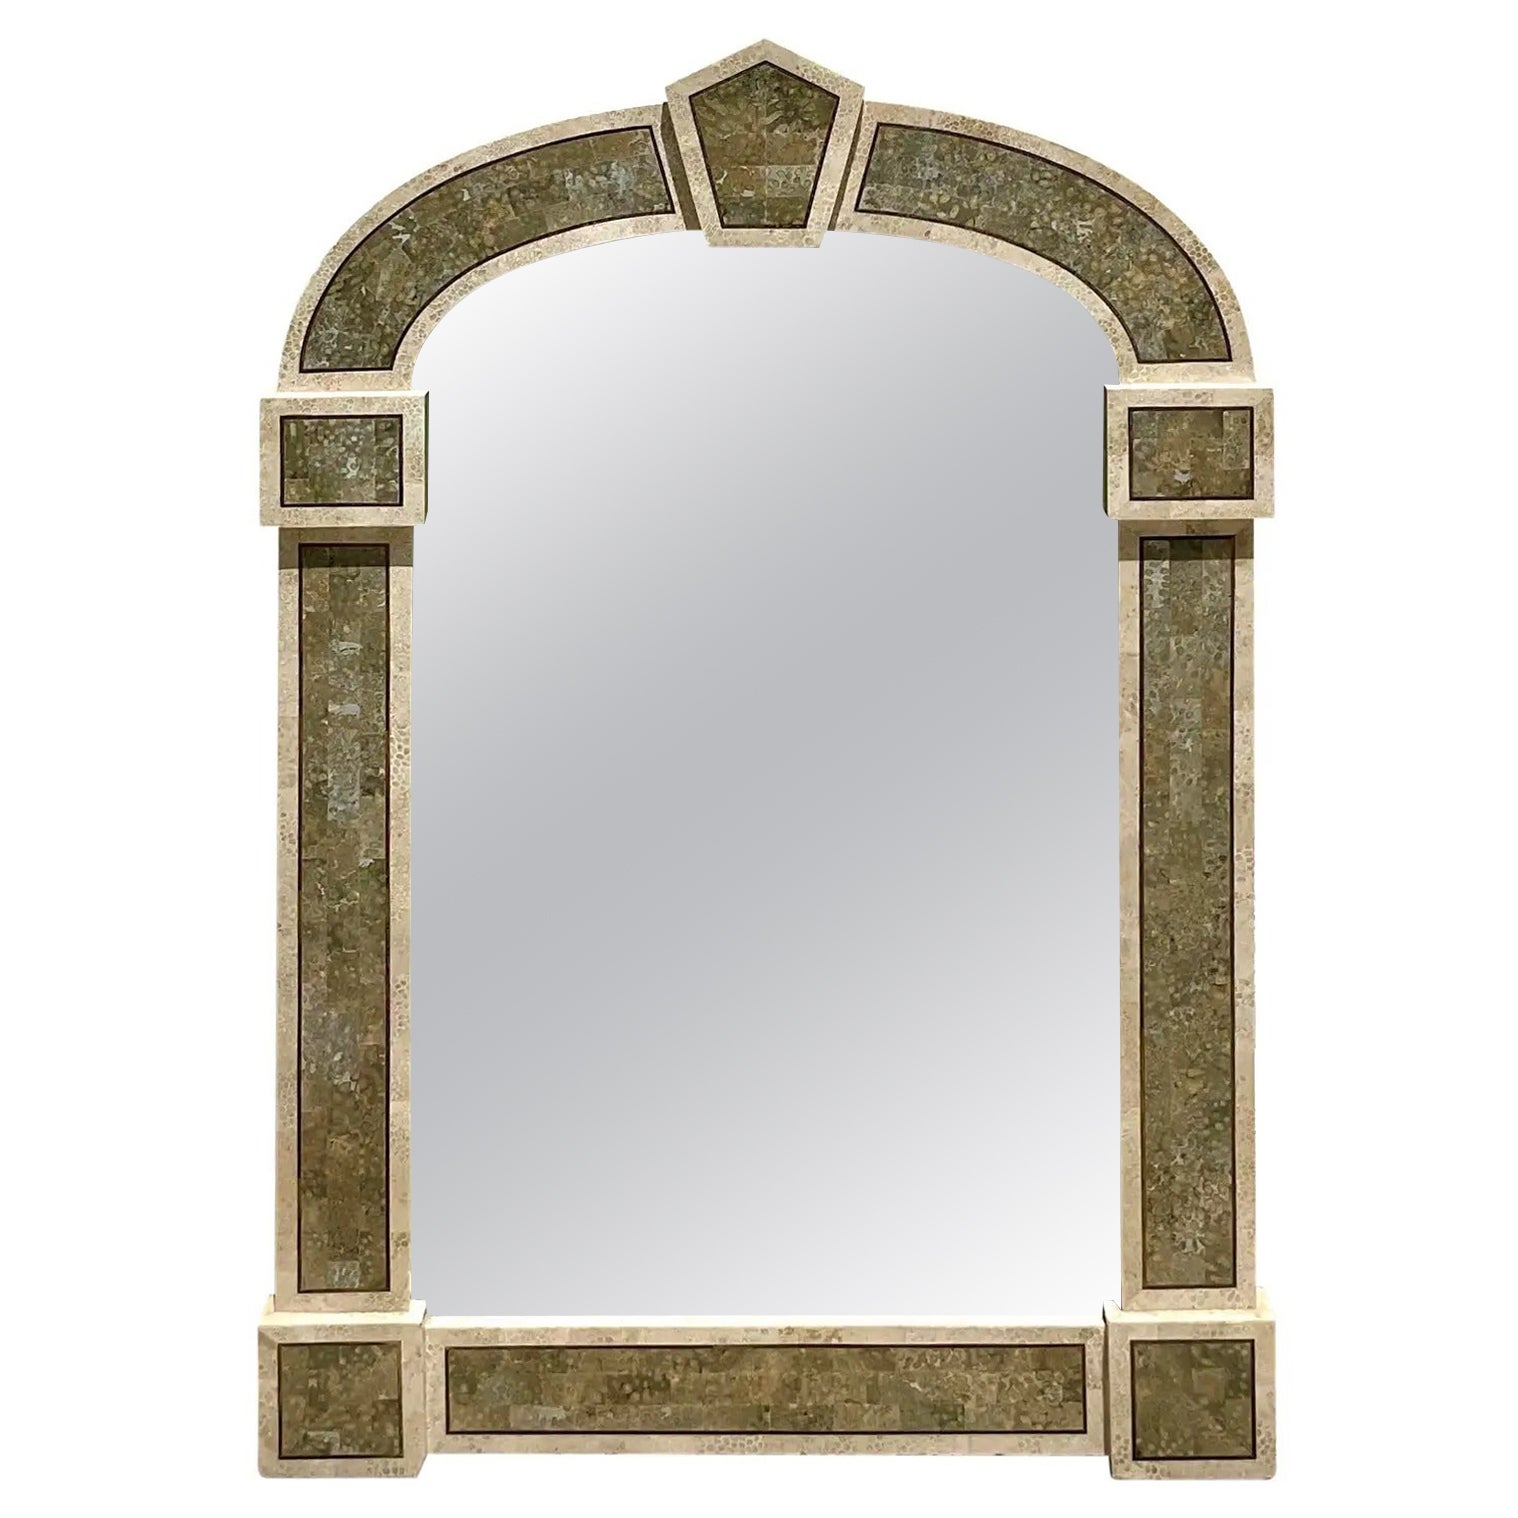 Vintage Regency Tessellated Stone Arched Mirror